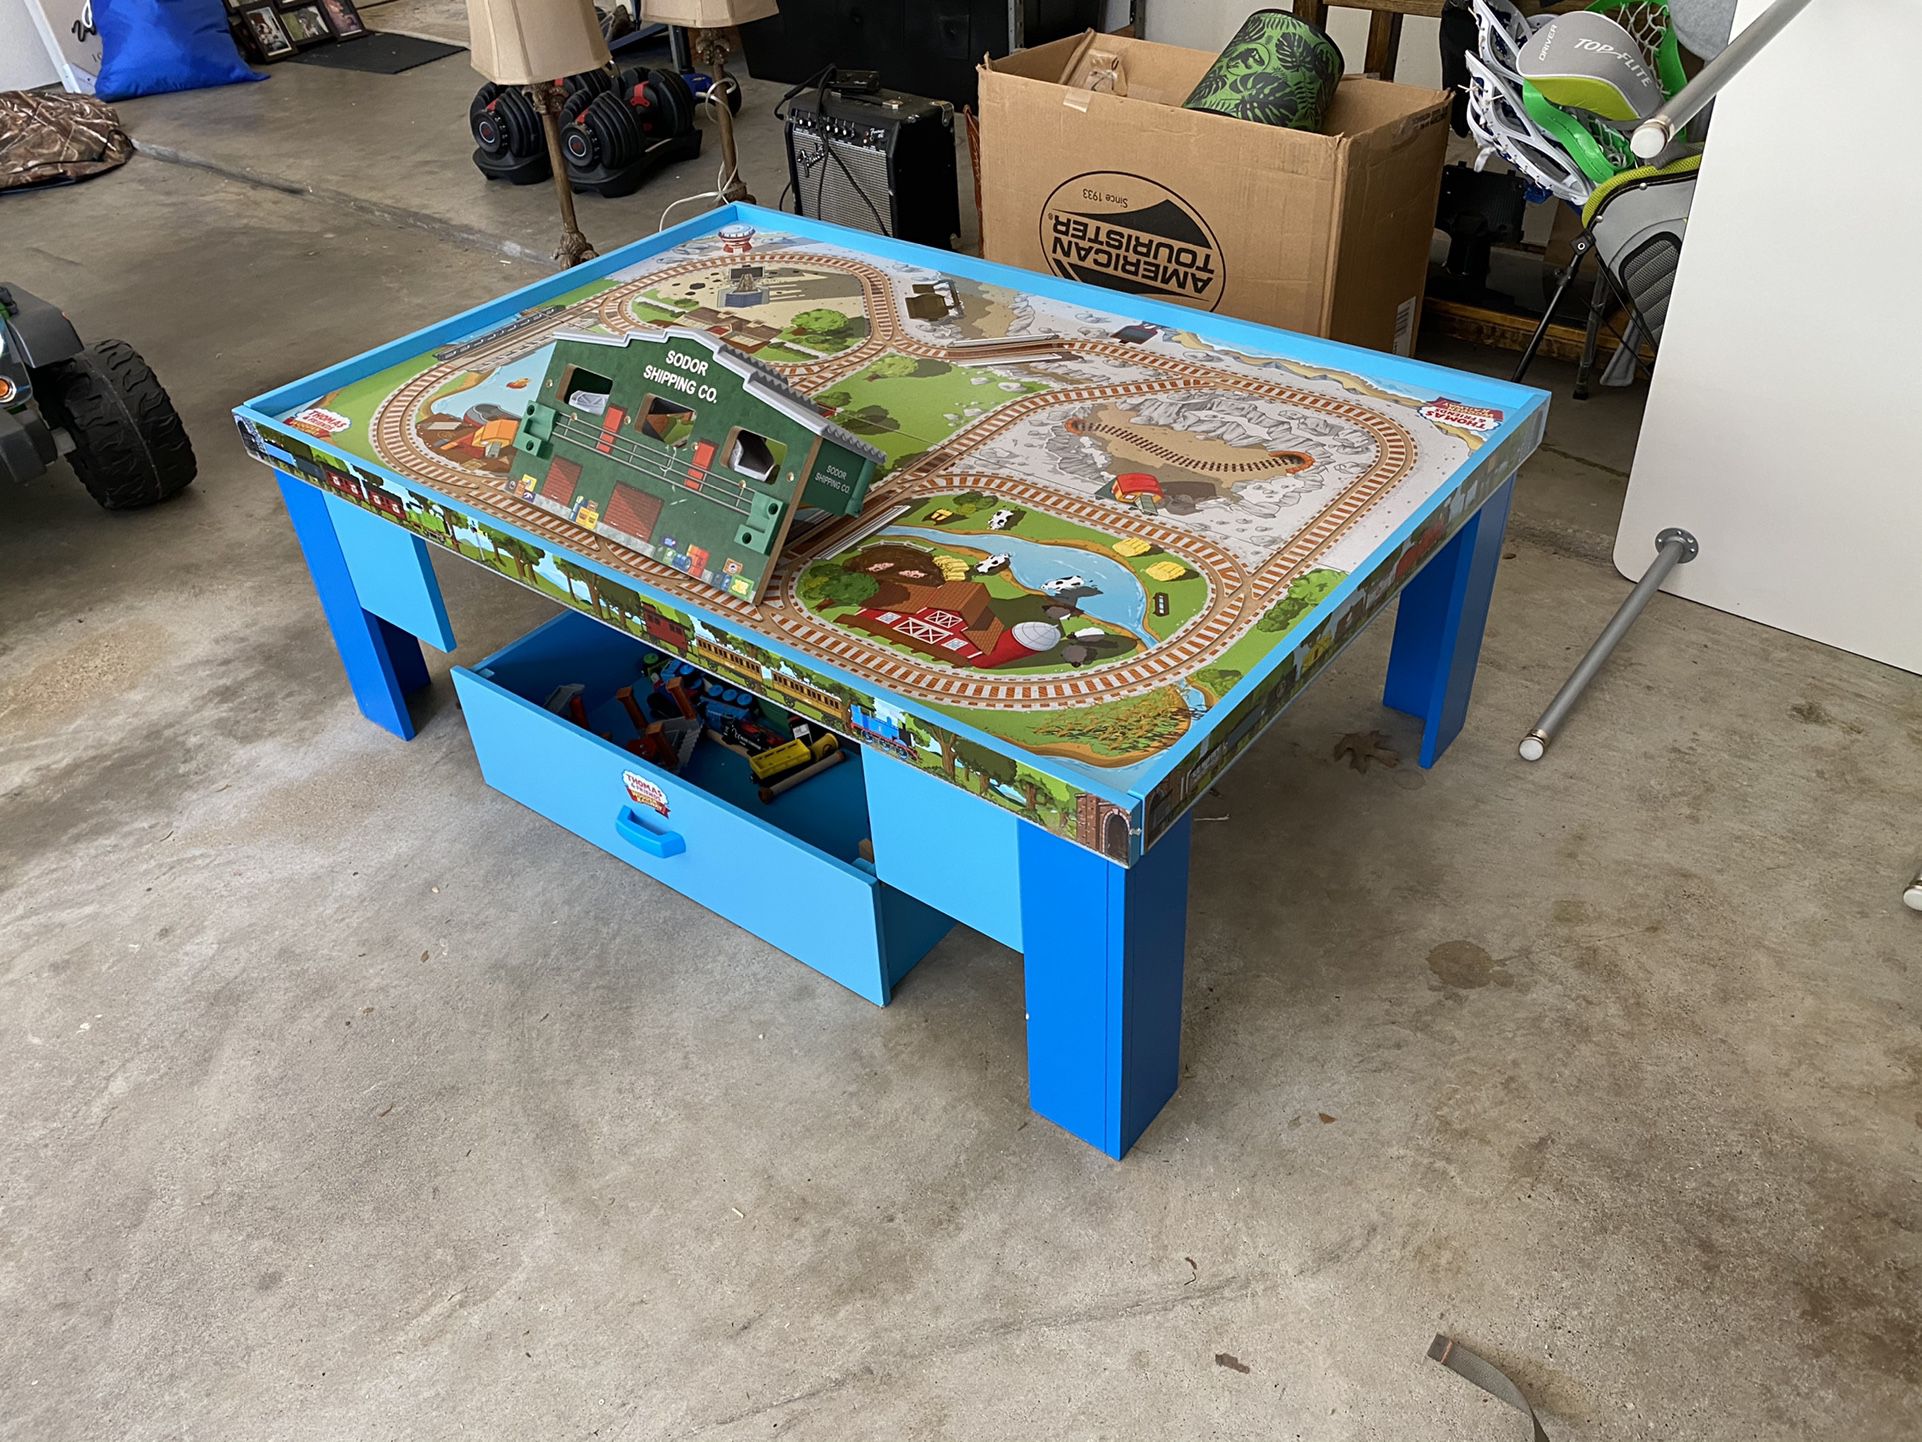 Thomas & Friends Railway Train Table with Trains